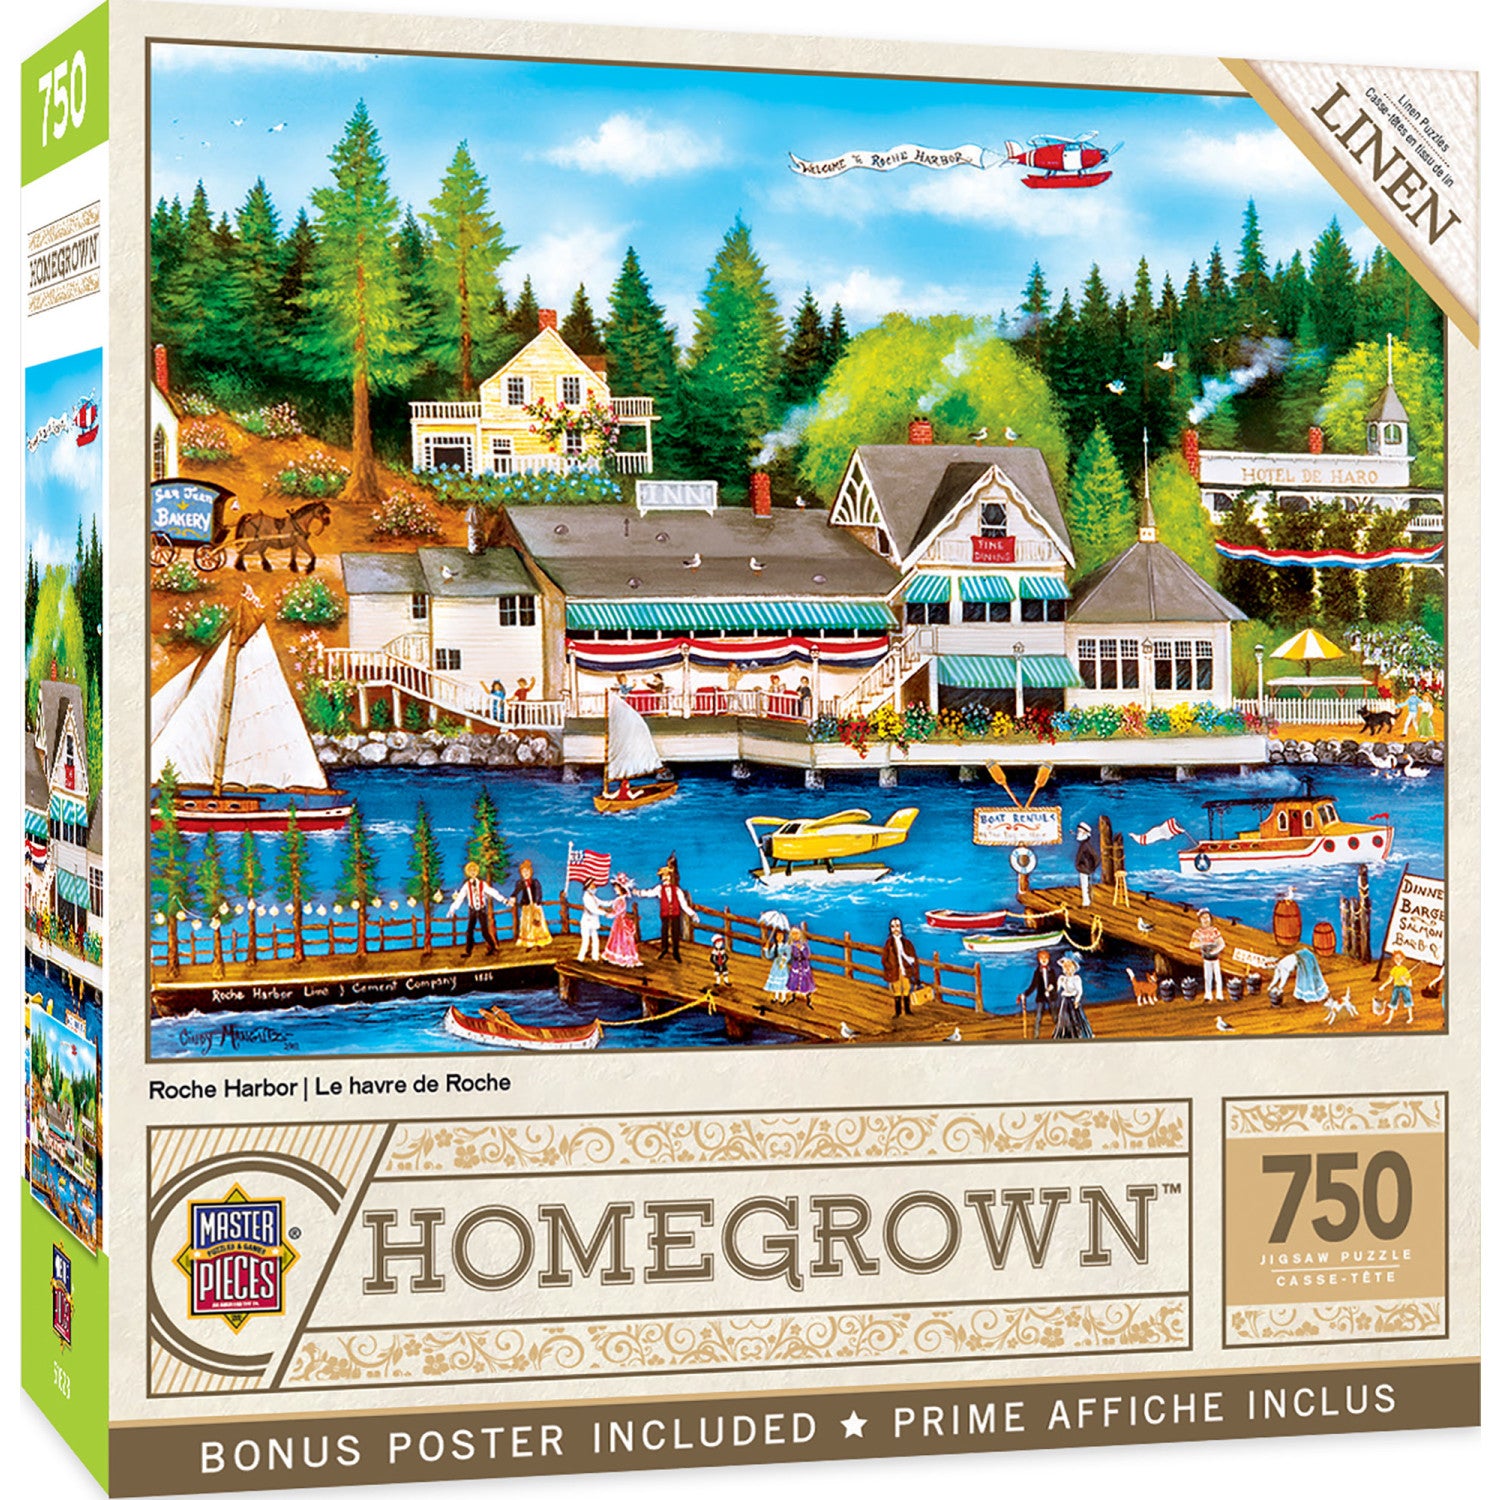 Homegrown - Roche Harbor 750 Piece Jigsaw Puzzle